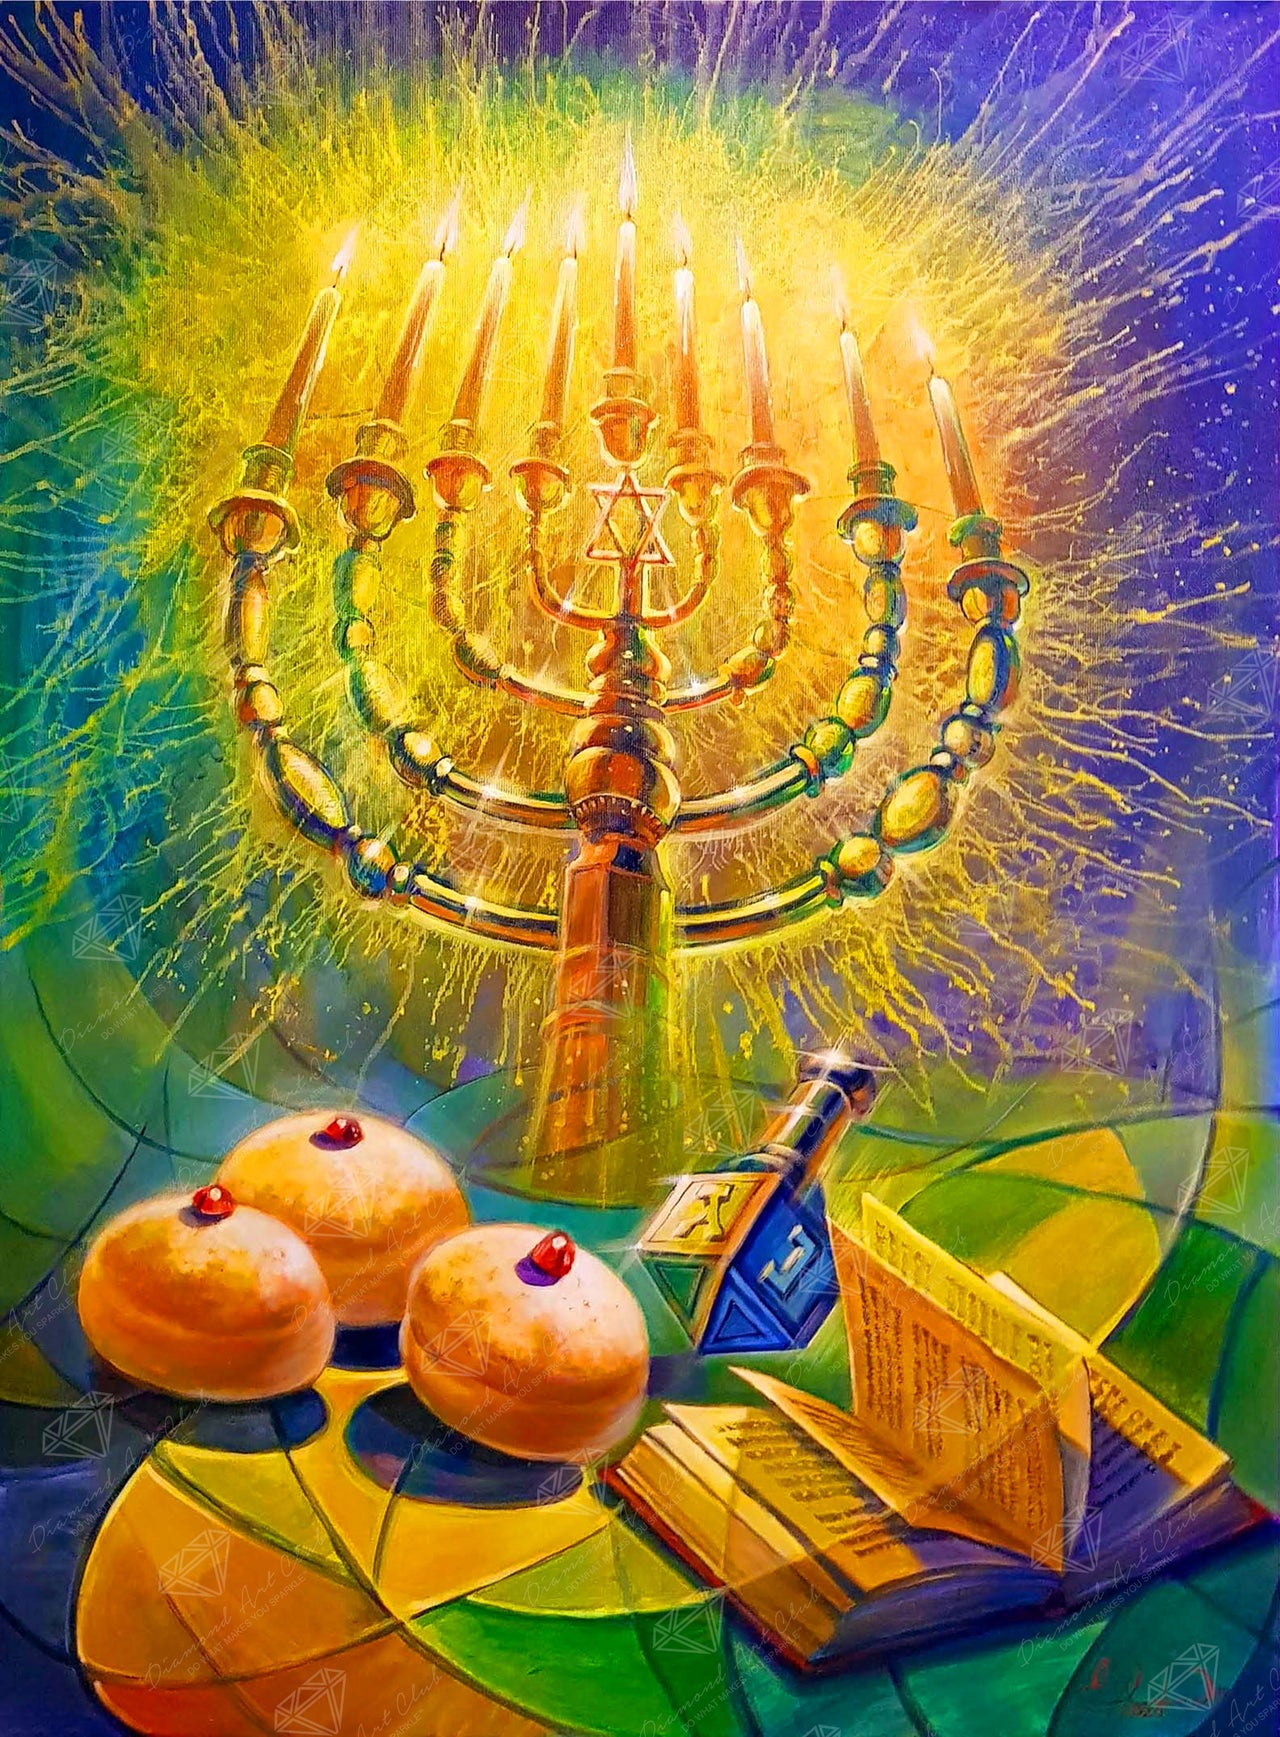 Diamond Painting The Jewish Festival of Lights 22" x 30" (55.8cm x 75.7cm) / Square With 59 Colors Including 3 ABs and 2 Fairy Dust Diamonds / 68,096